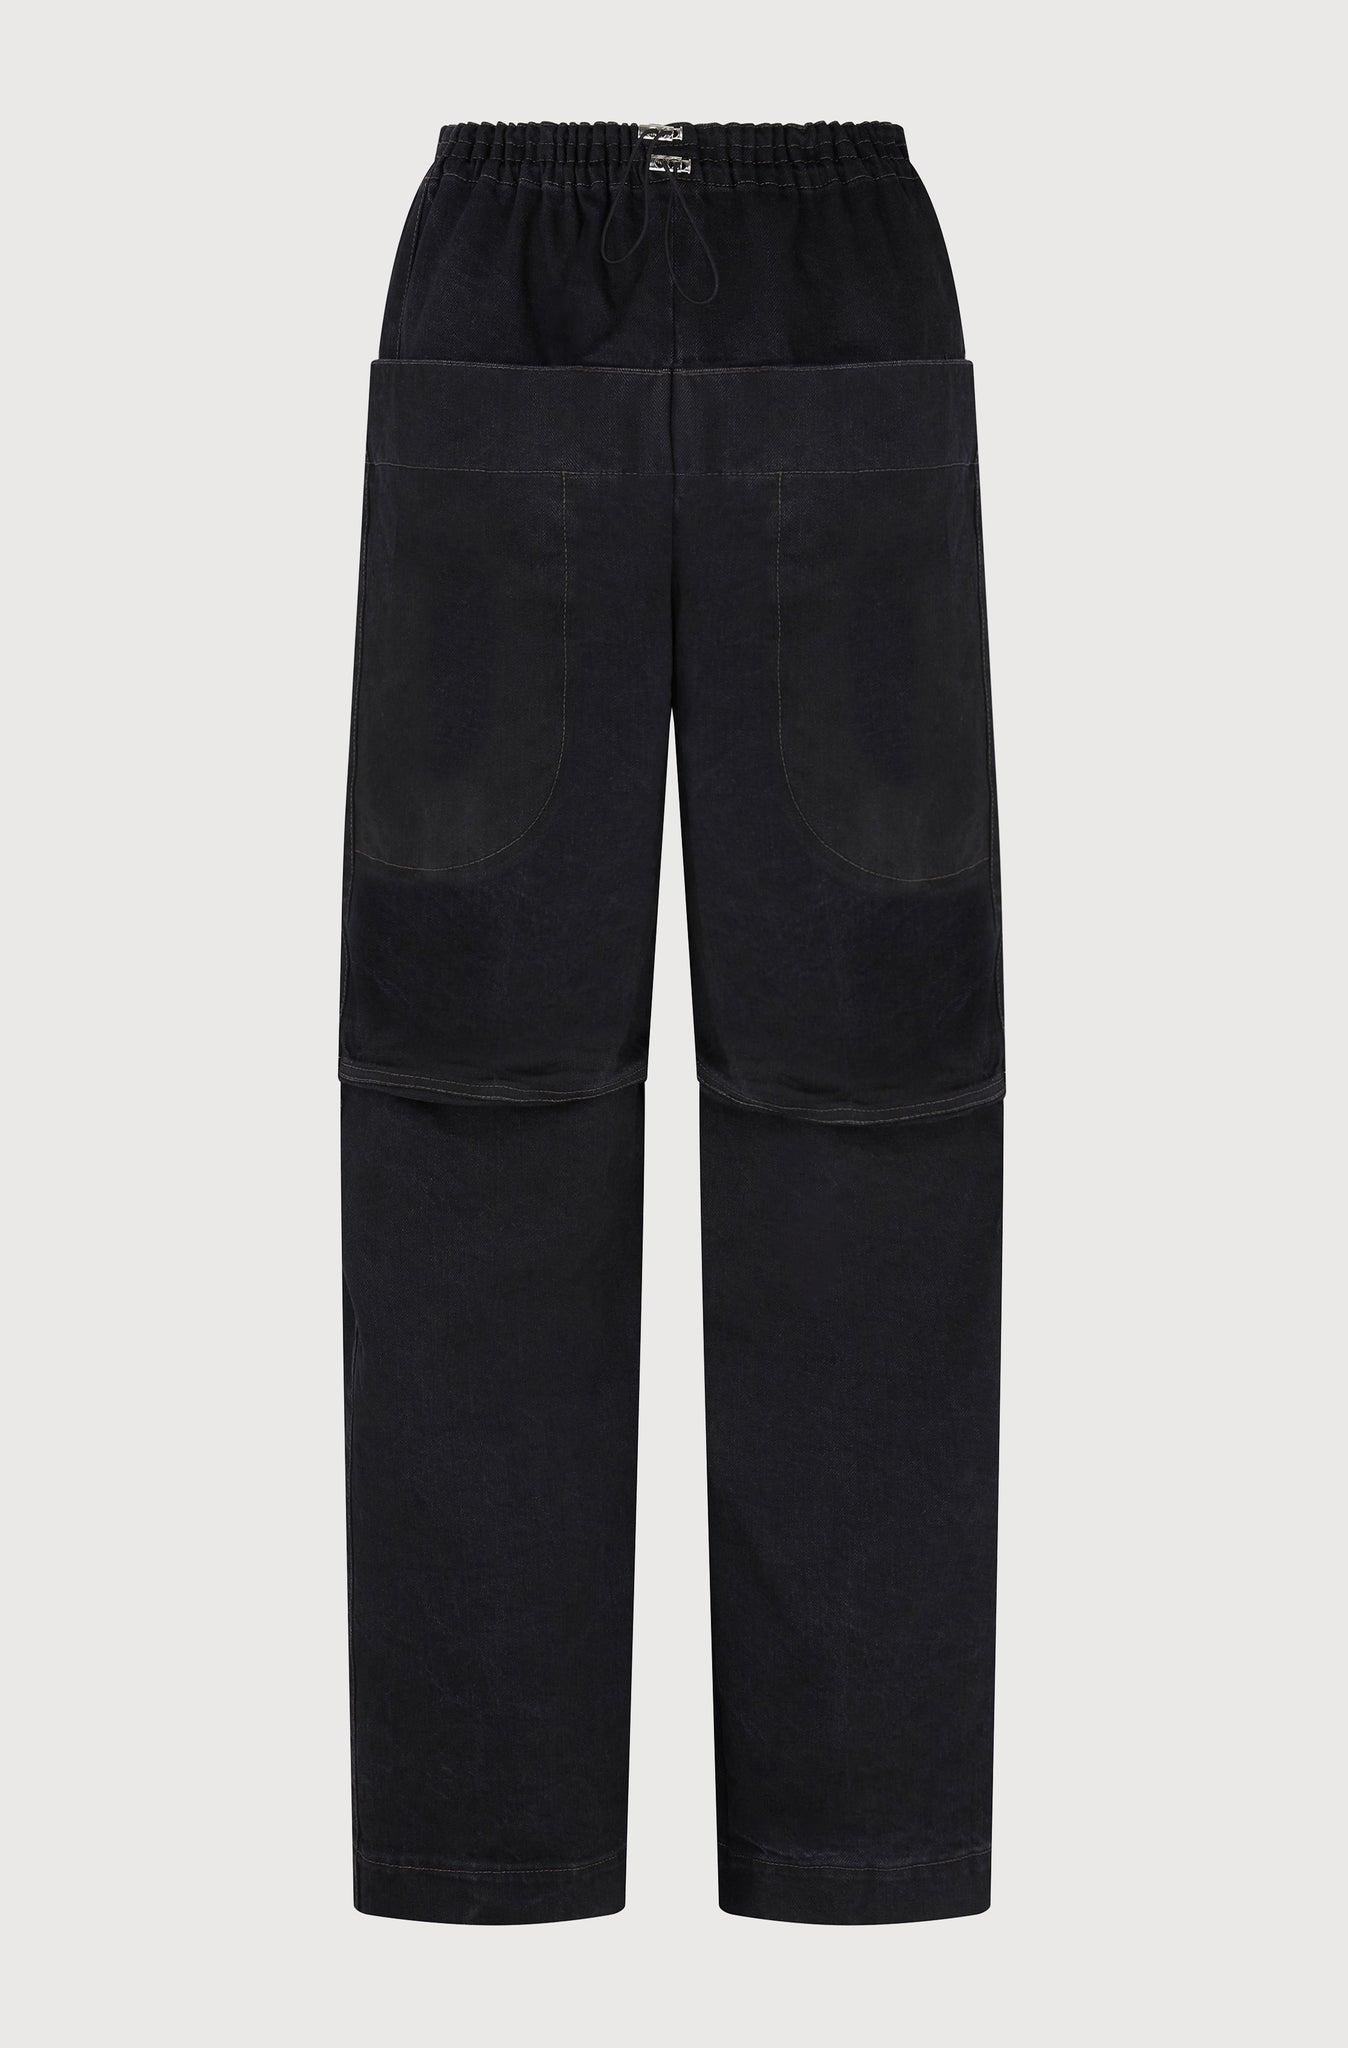 DROPPED FRONT TROUSERS - BLACK DENIM